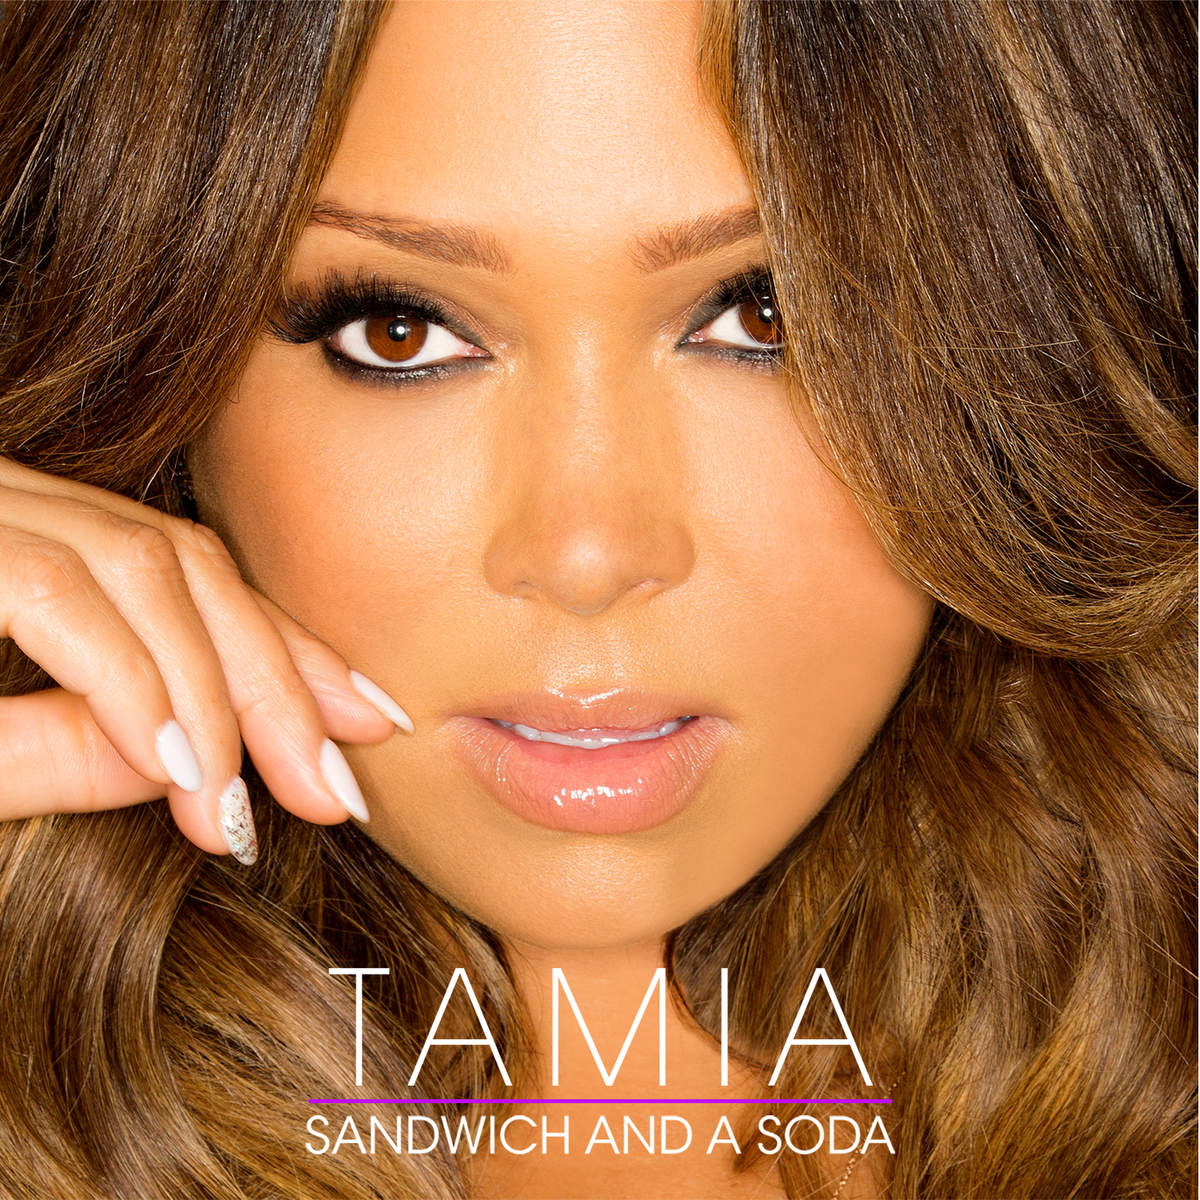 New Music: Tamia – “Sandwich And A Soda”